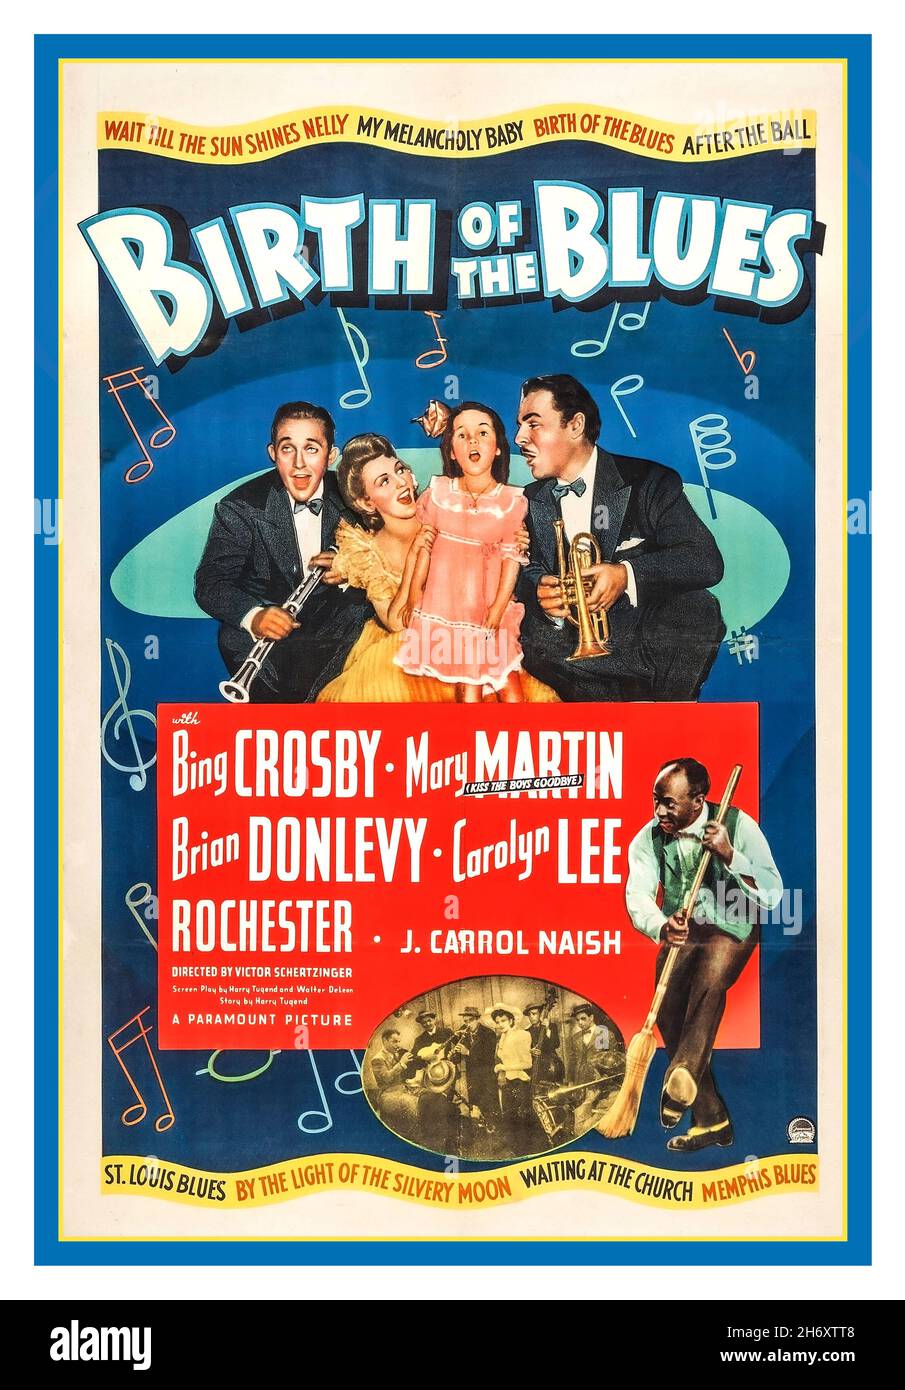 BING CROSBY Vintage Movie Film Poster 'Birth of the Blues'  a 1941 American musical film directed by Victor Schertzinger and starring Bing Crosby, Mary Martin and Brian Donlevy. The plot loosely follows the origins and breakthrough success of the Original Dixieland Jazz Band in New Orleans. It was well-received by critics on its release. It was nominated for an Academy Award for Best Original Score. Stock Photo